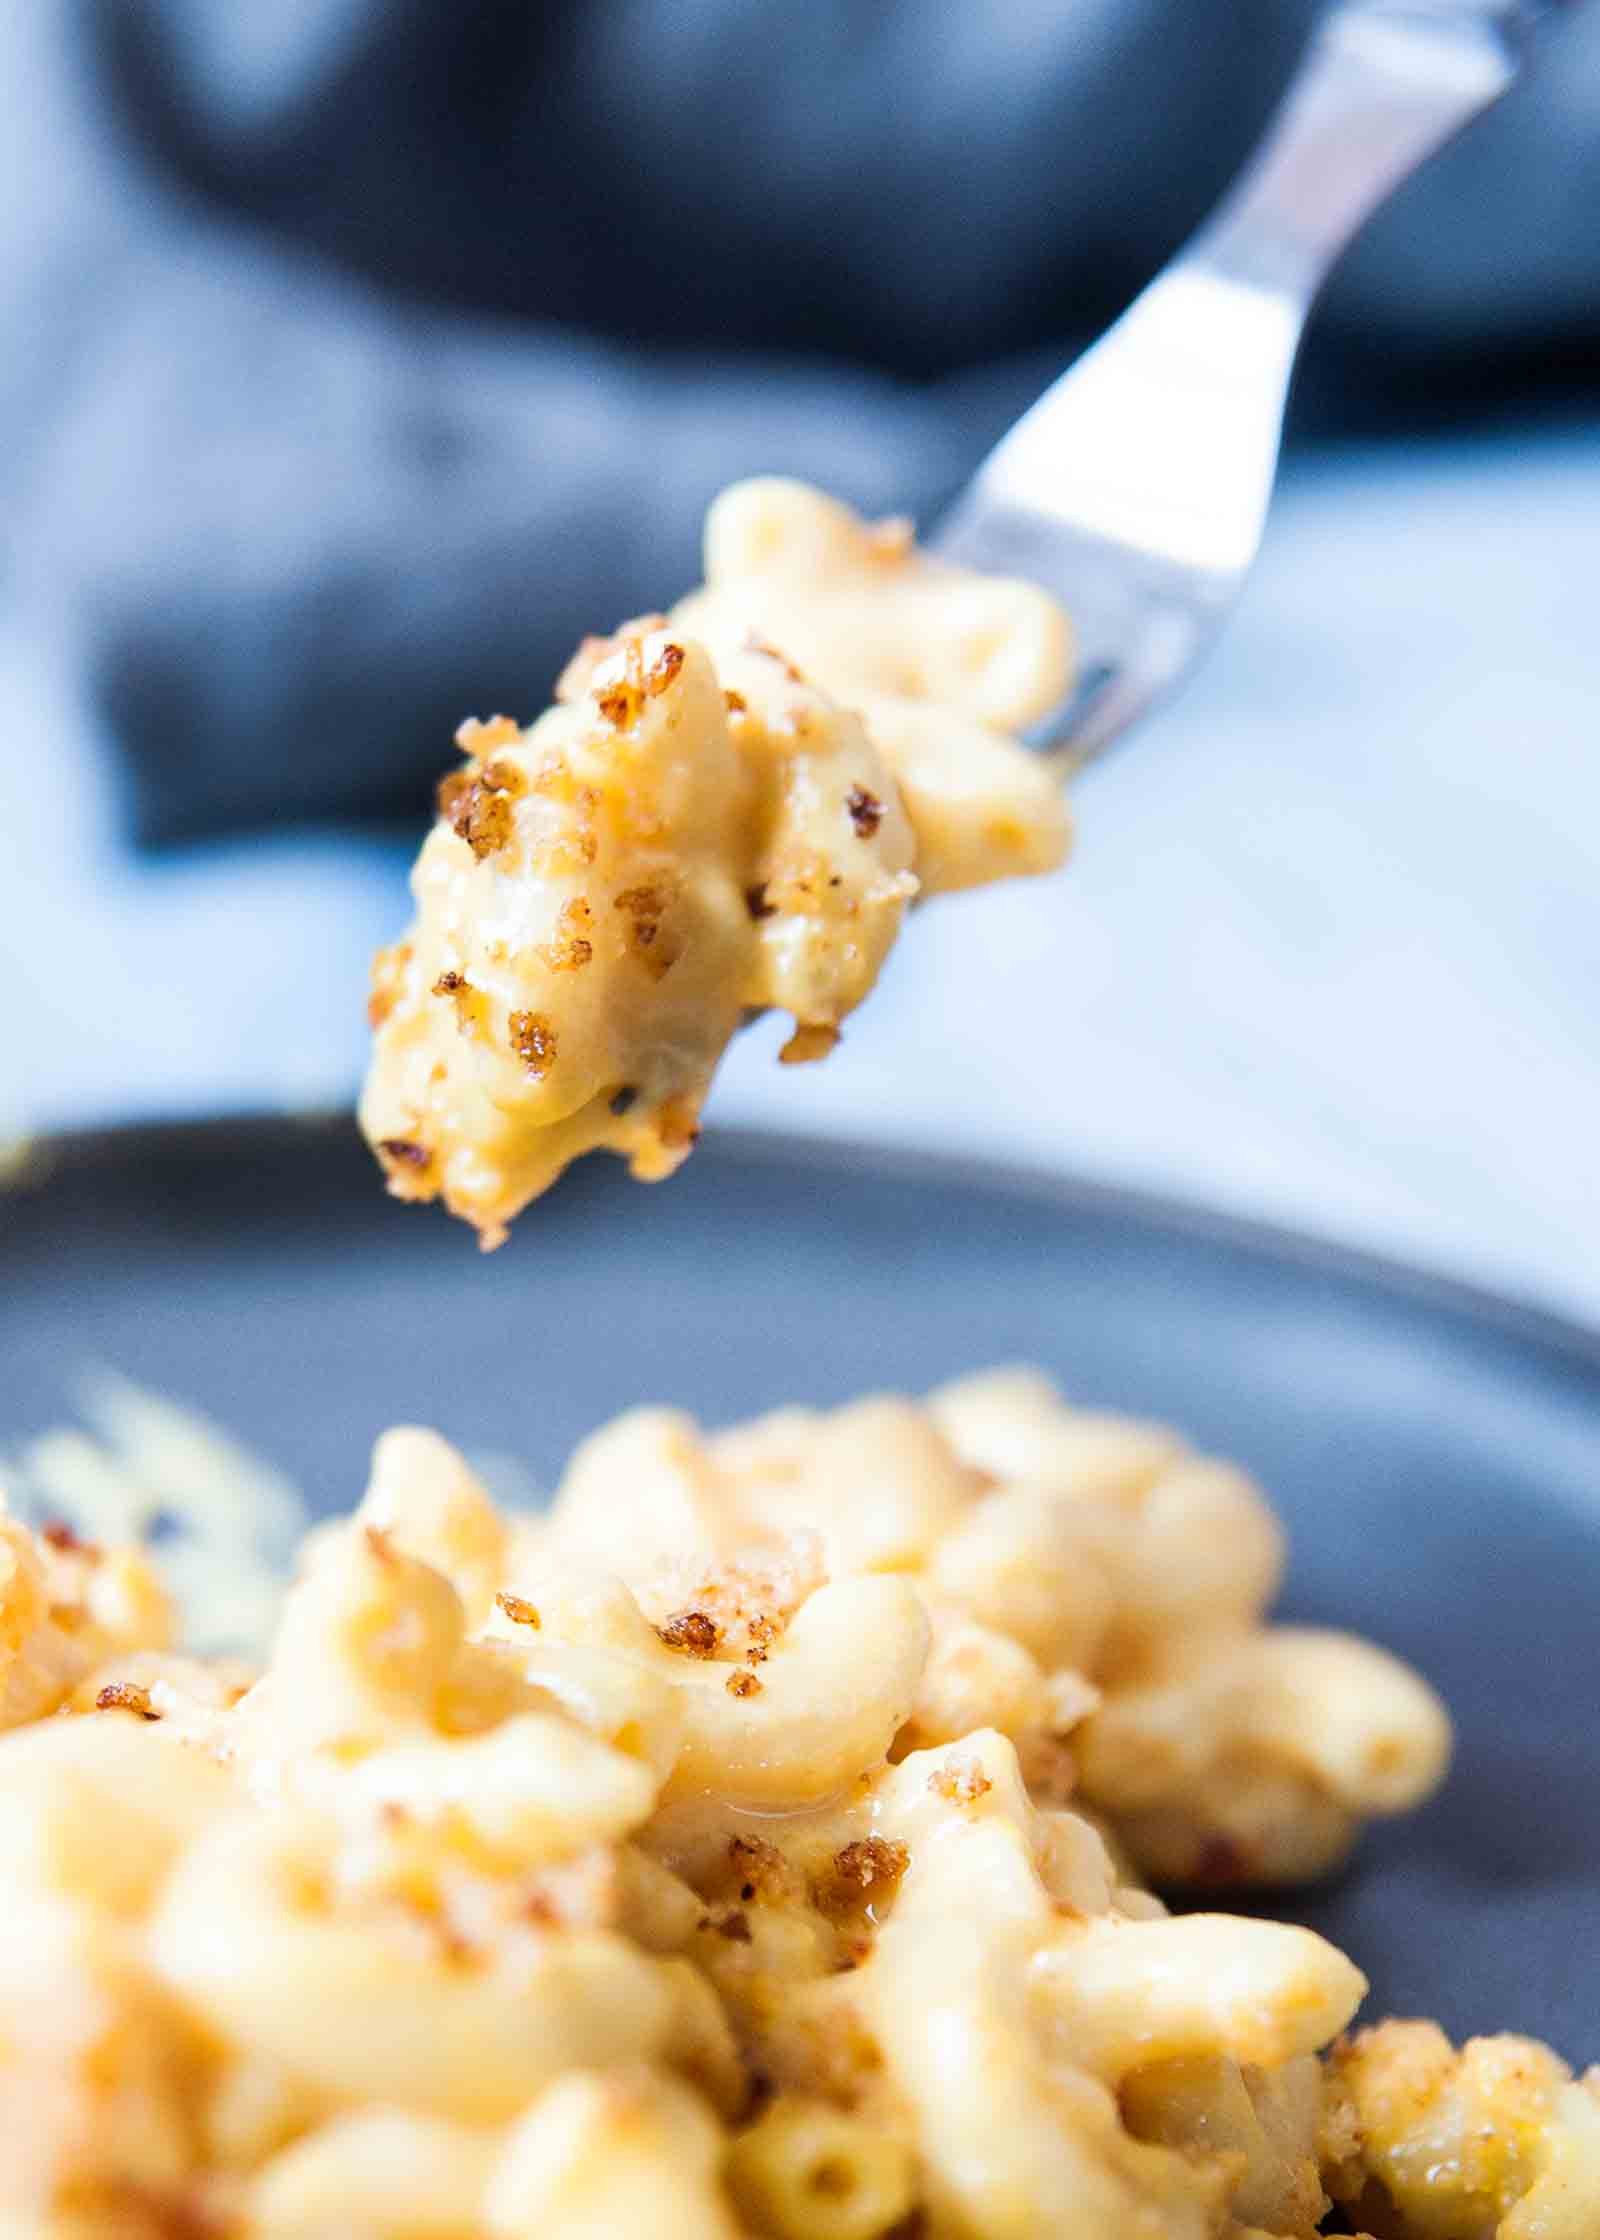 Reheating Baked Macaroni And Cheese Creamy Baked Mac and Cheese Recipe